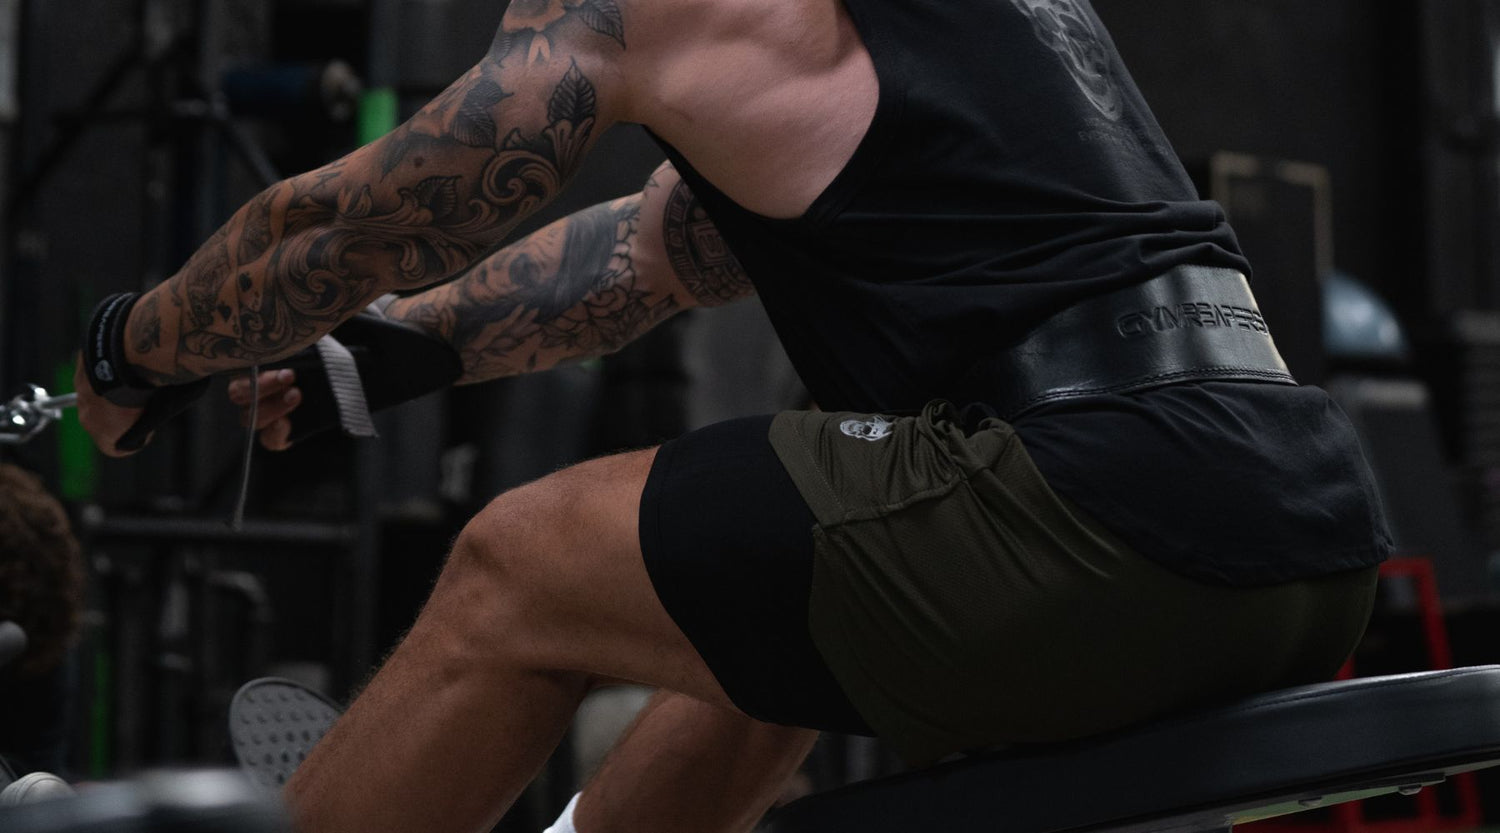 Does a lifting belt help your back?